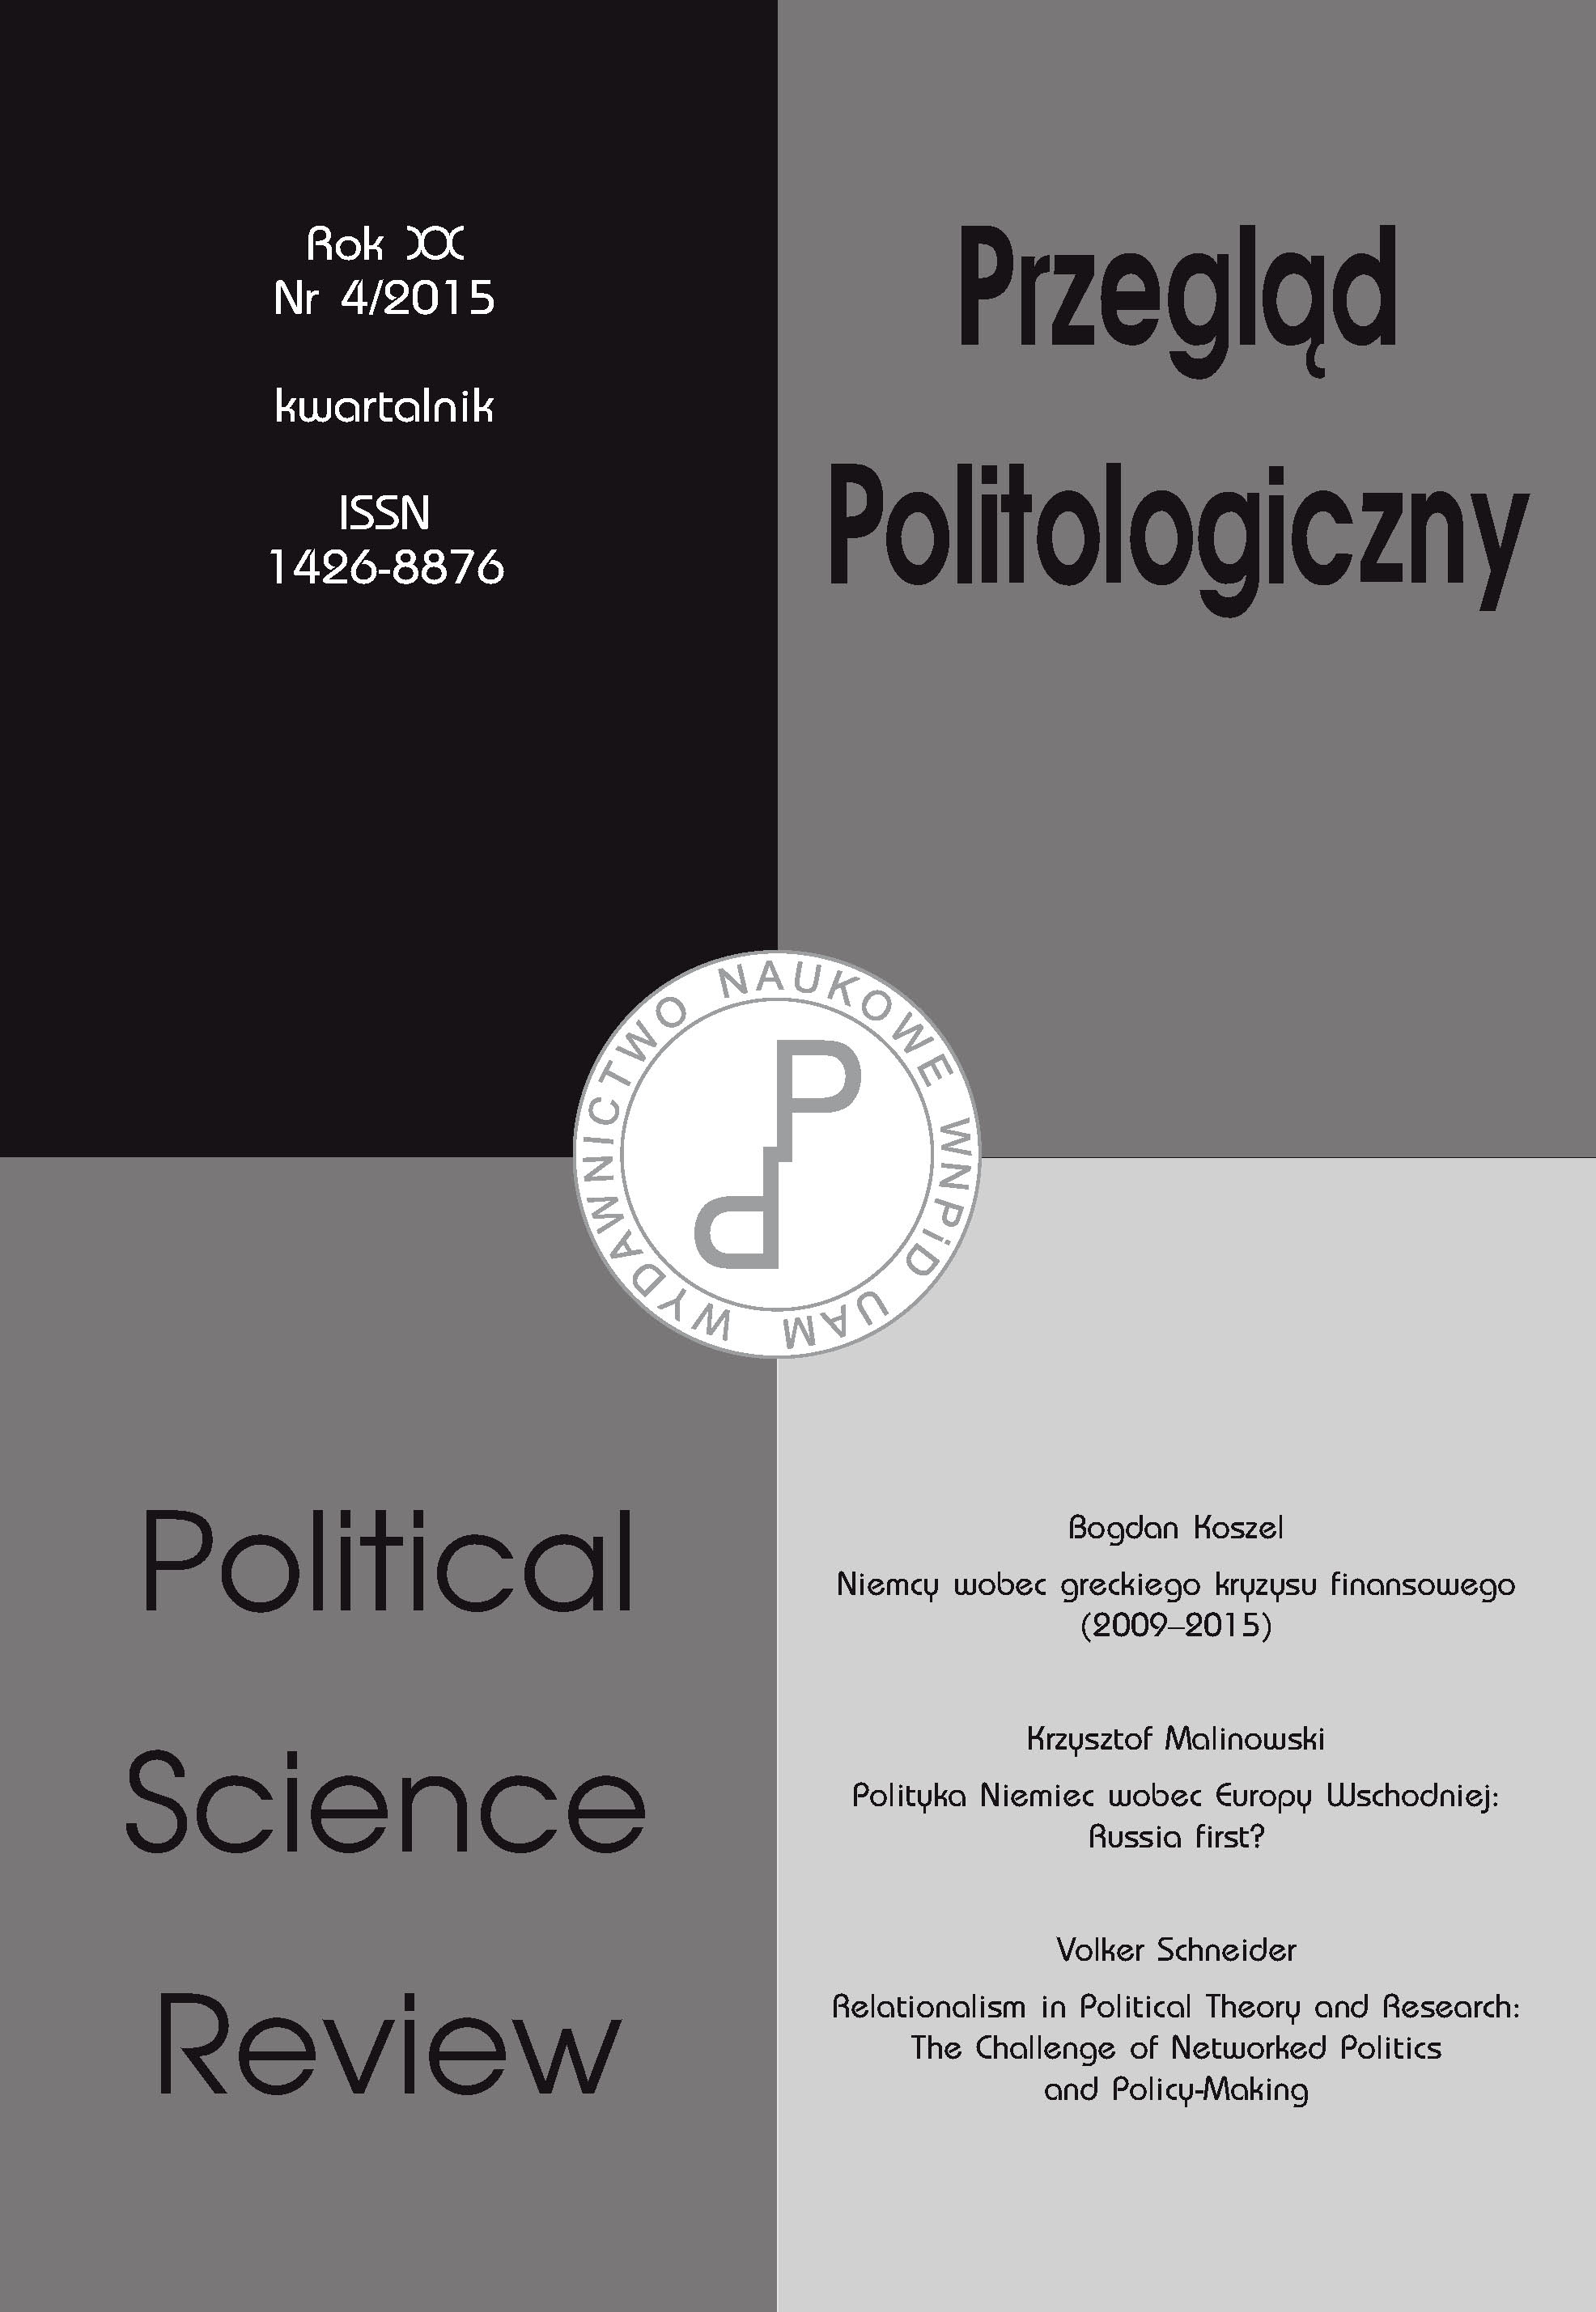 Relationalism in Political Theory and Research: The Challenge of Networked Politics and Policy-Making Cover Image